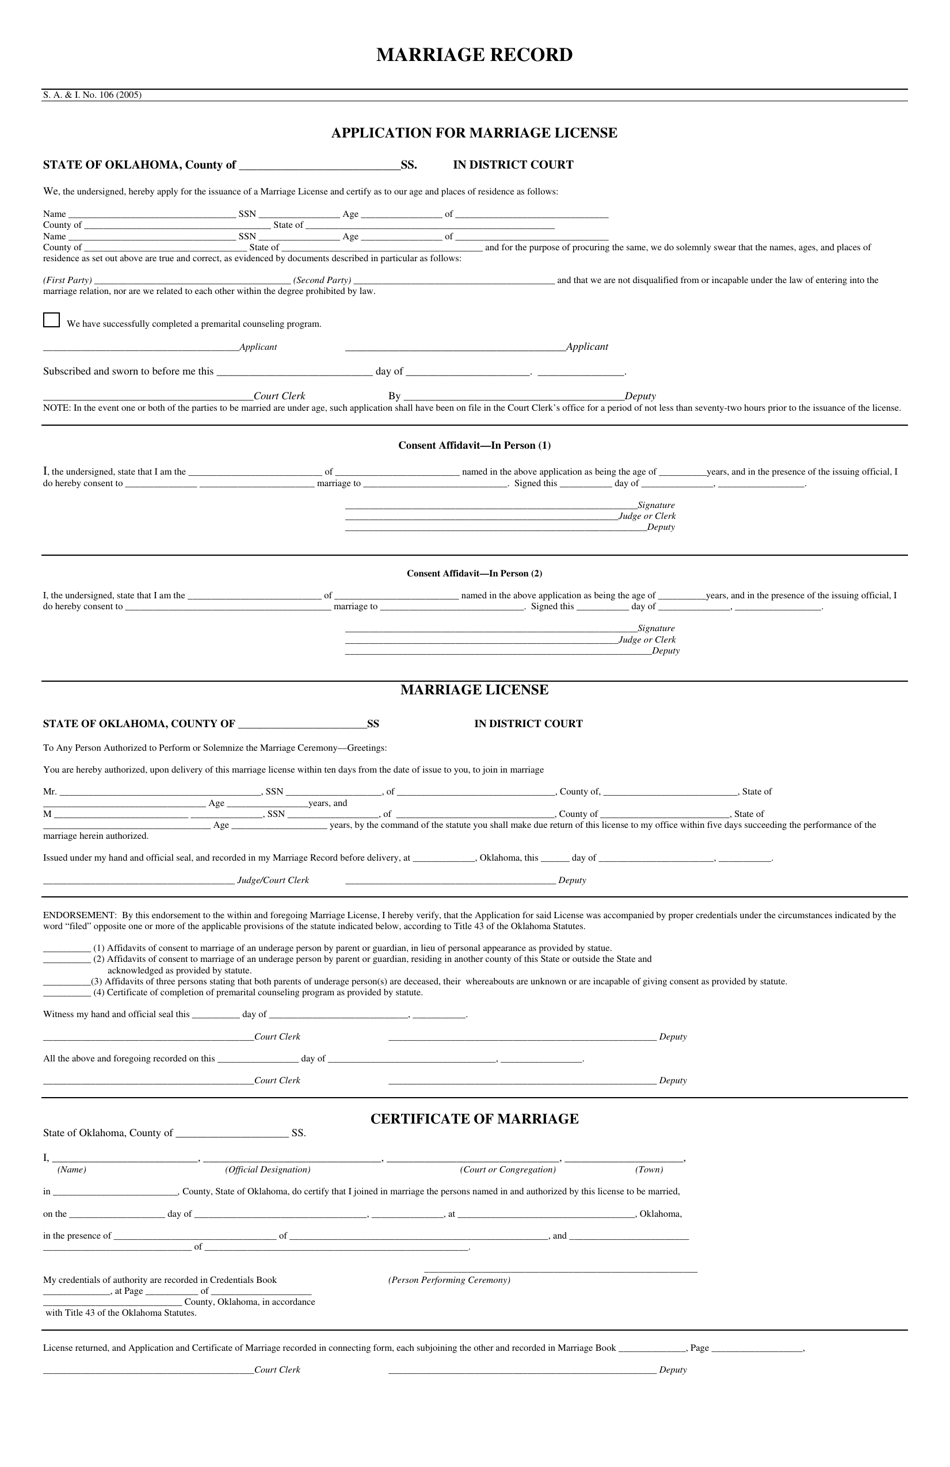 Form S.A. I.106 Marriage Record - Oklahoma, Page 1